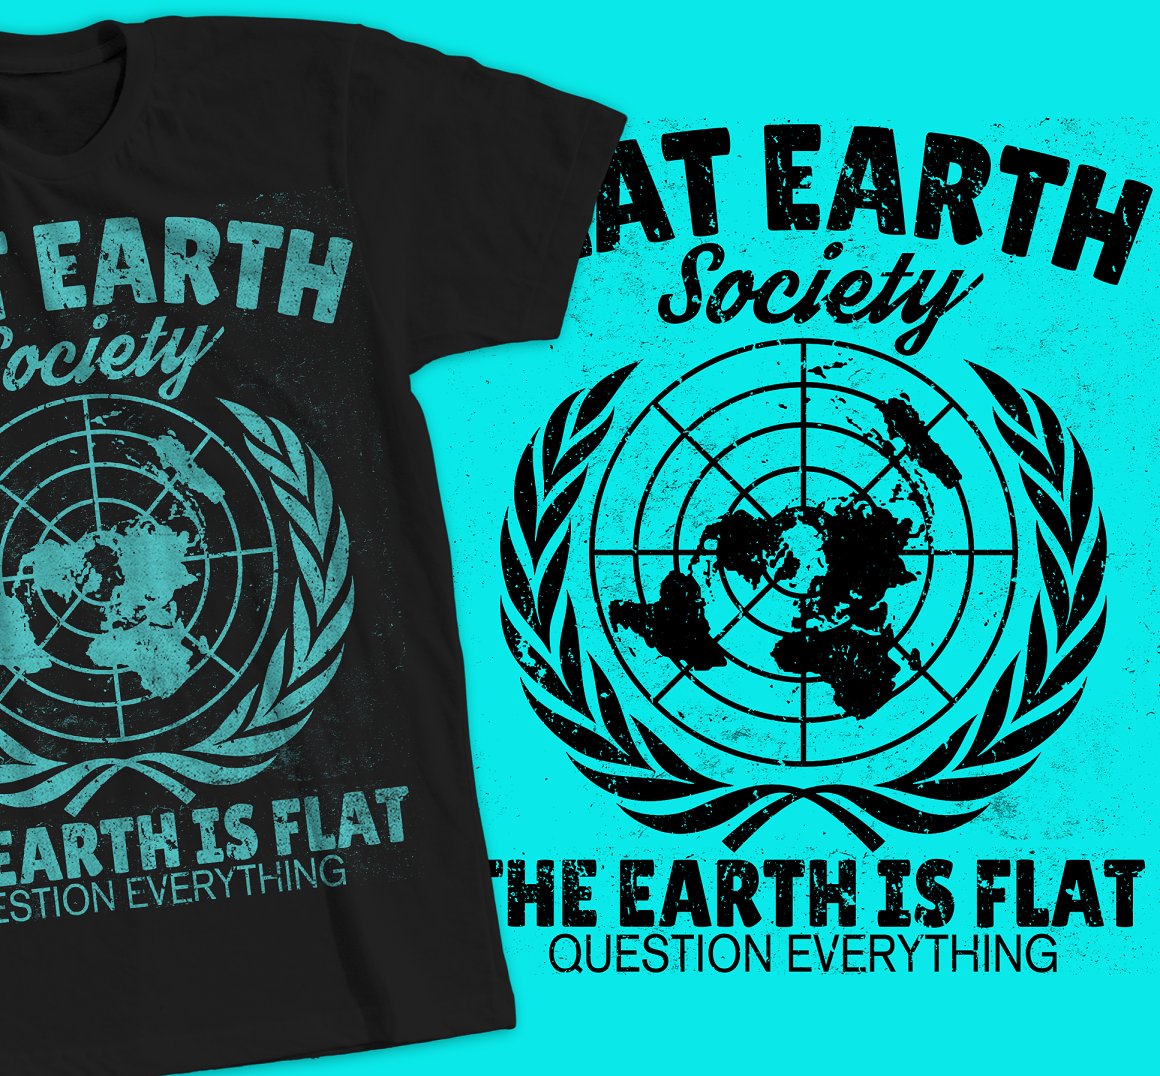 Retro vintage distressed design with the blue lettering "Flat earth society the earth is flat question everything" on black t-shirt and black lettering on a blue background.